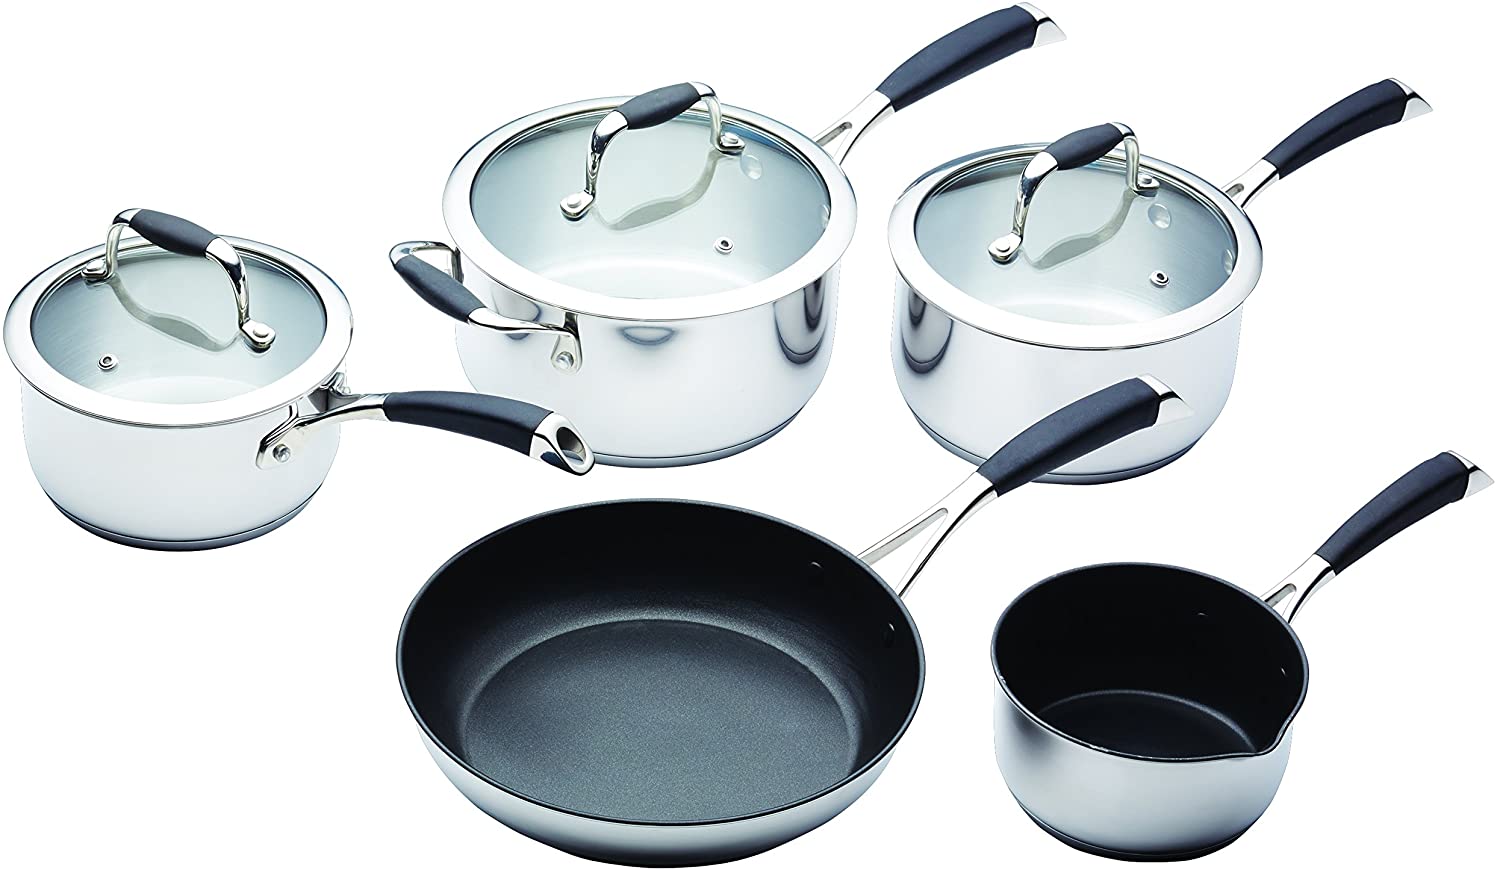 KitchenCraft Master Class Stainless Steel Induction-Ready Pan Set (5 Pieces)